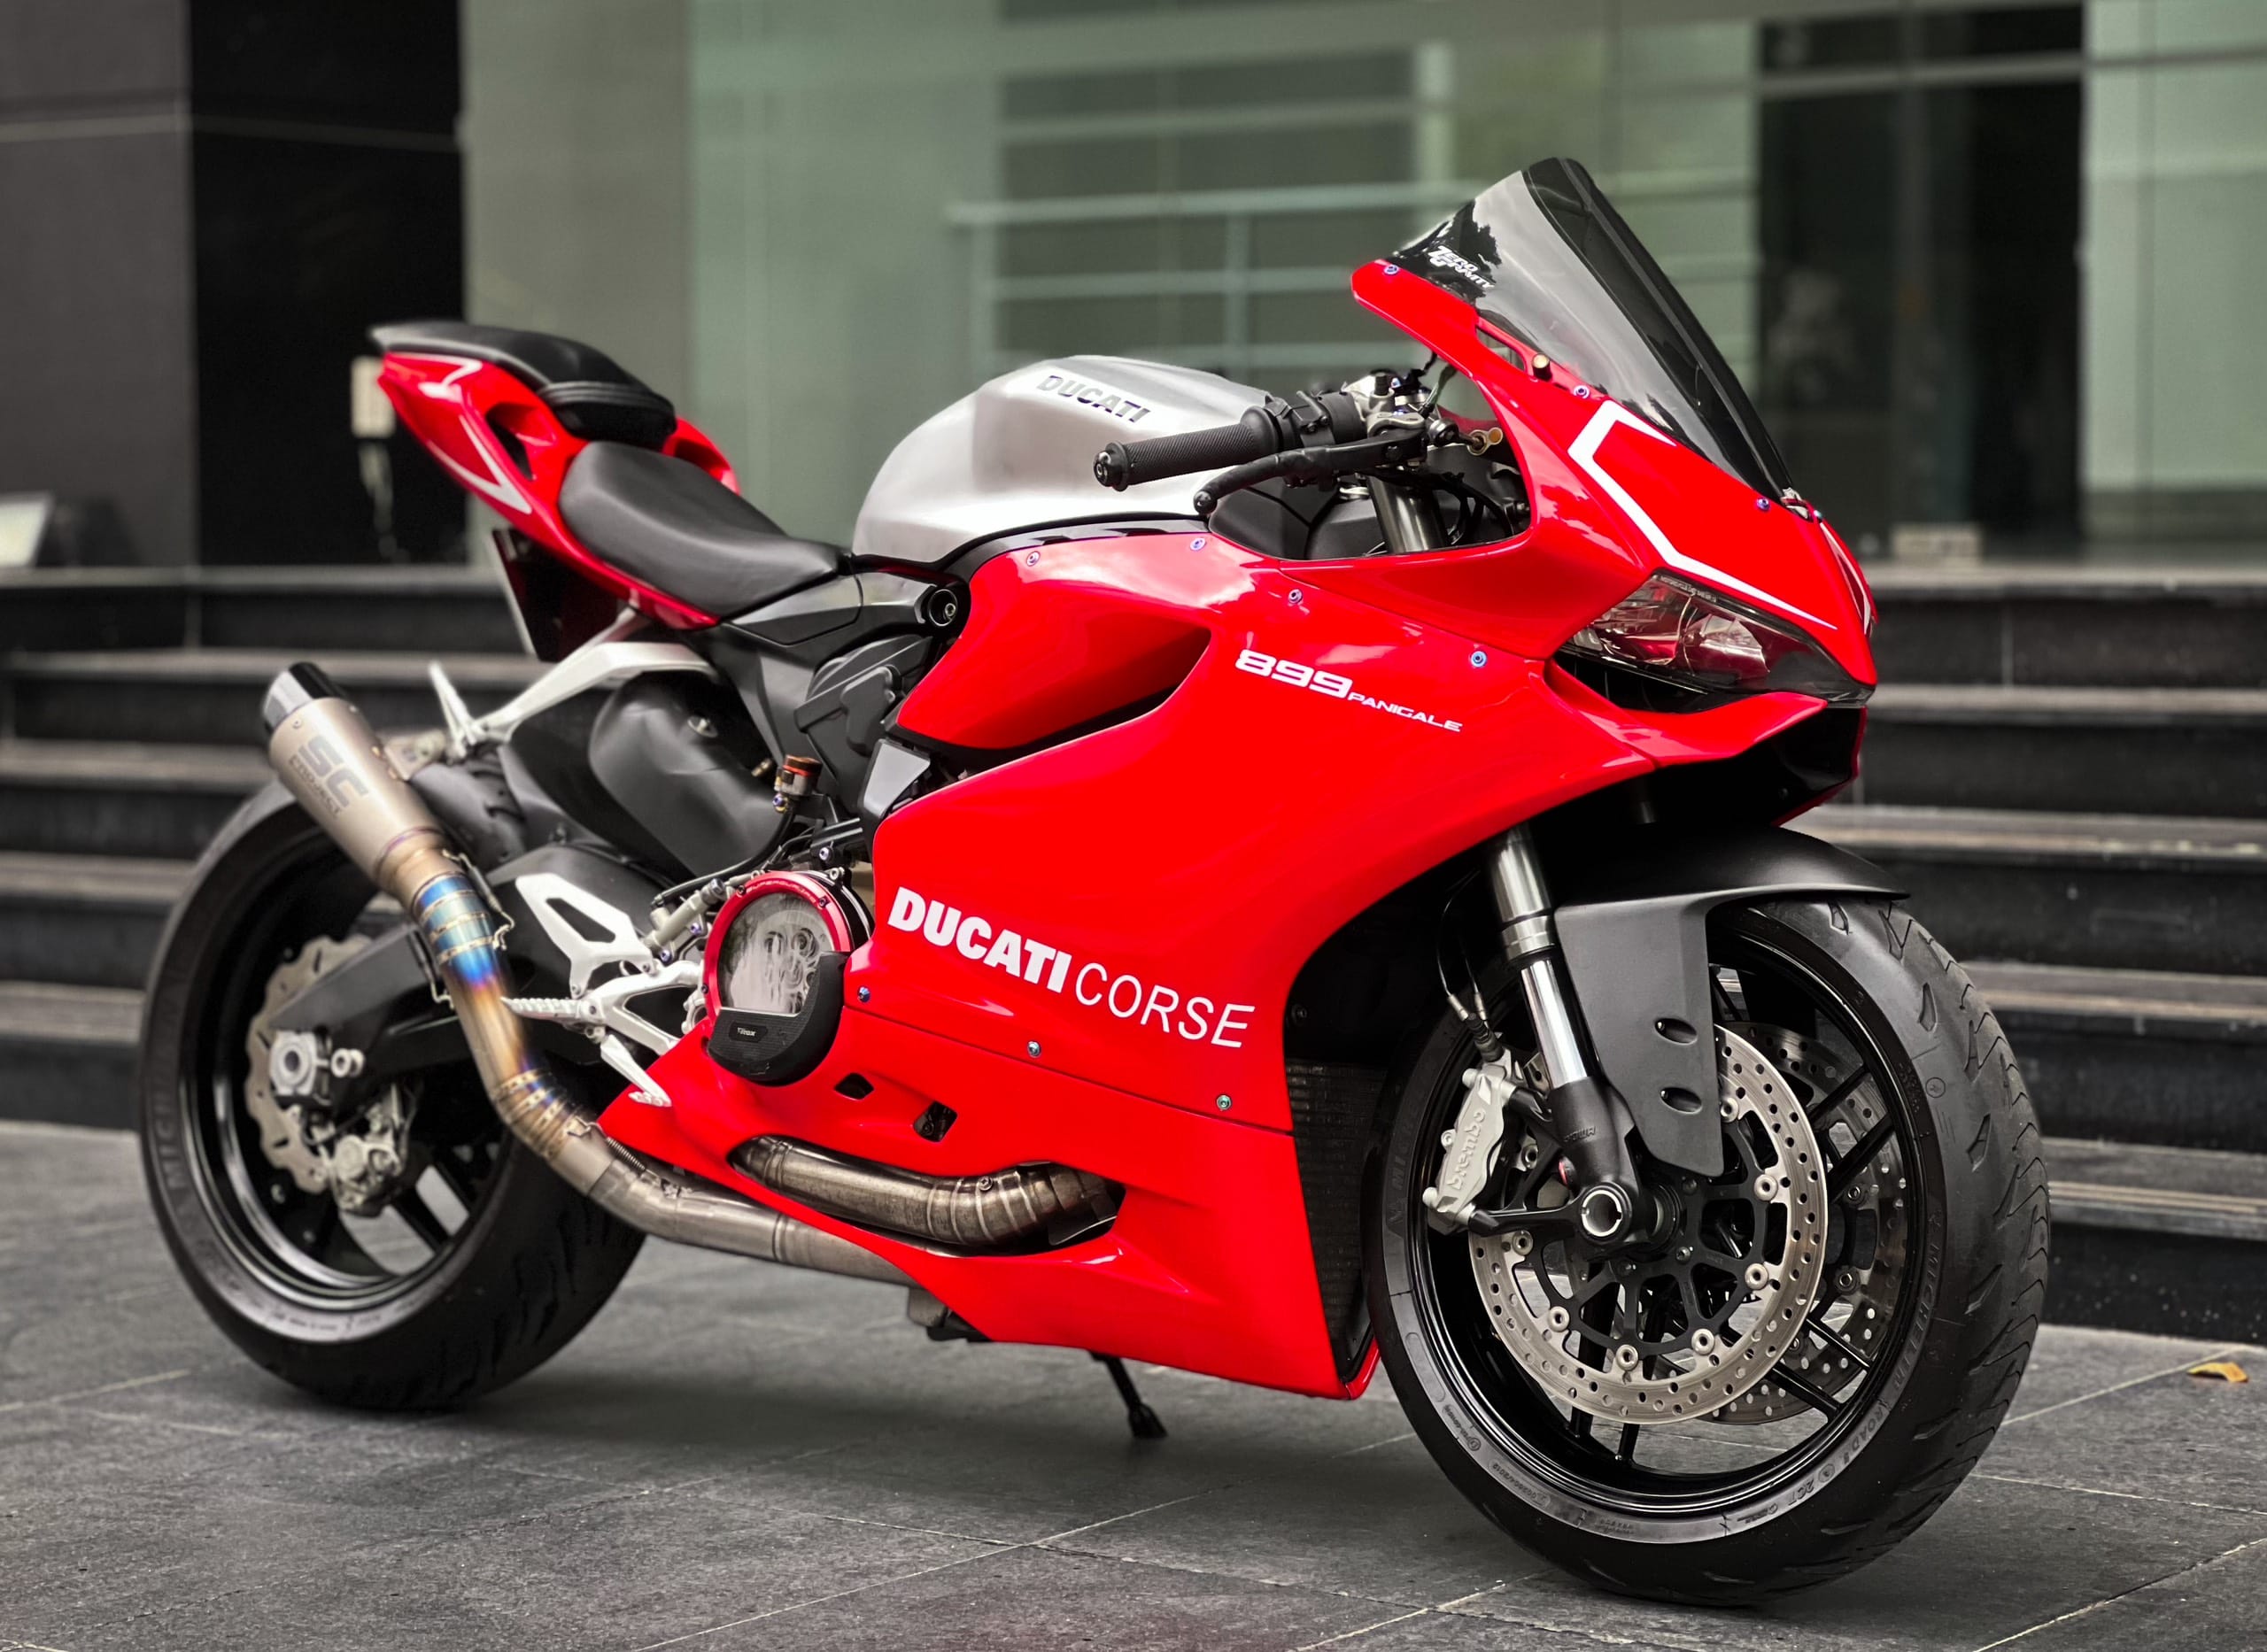 459 . Ducati panigale 899 ABS 2015